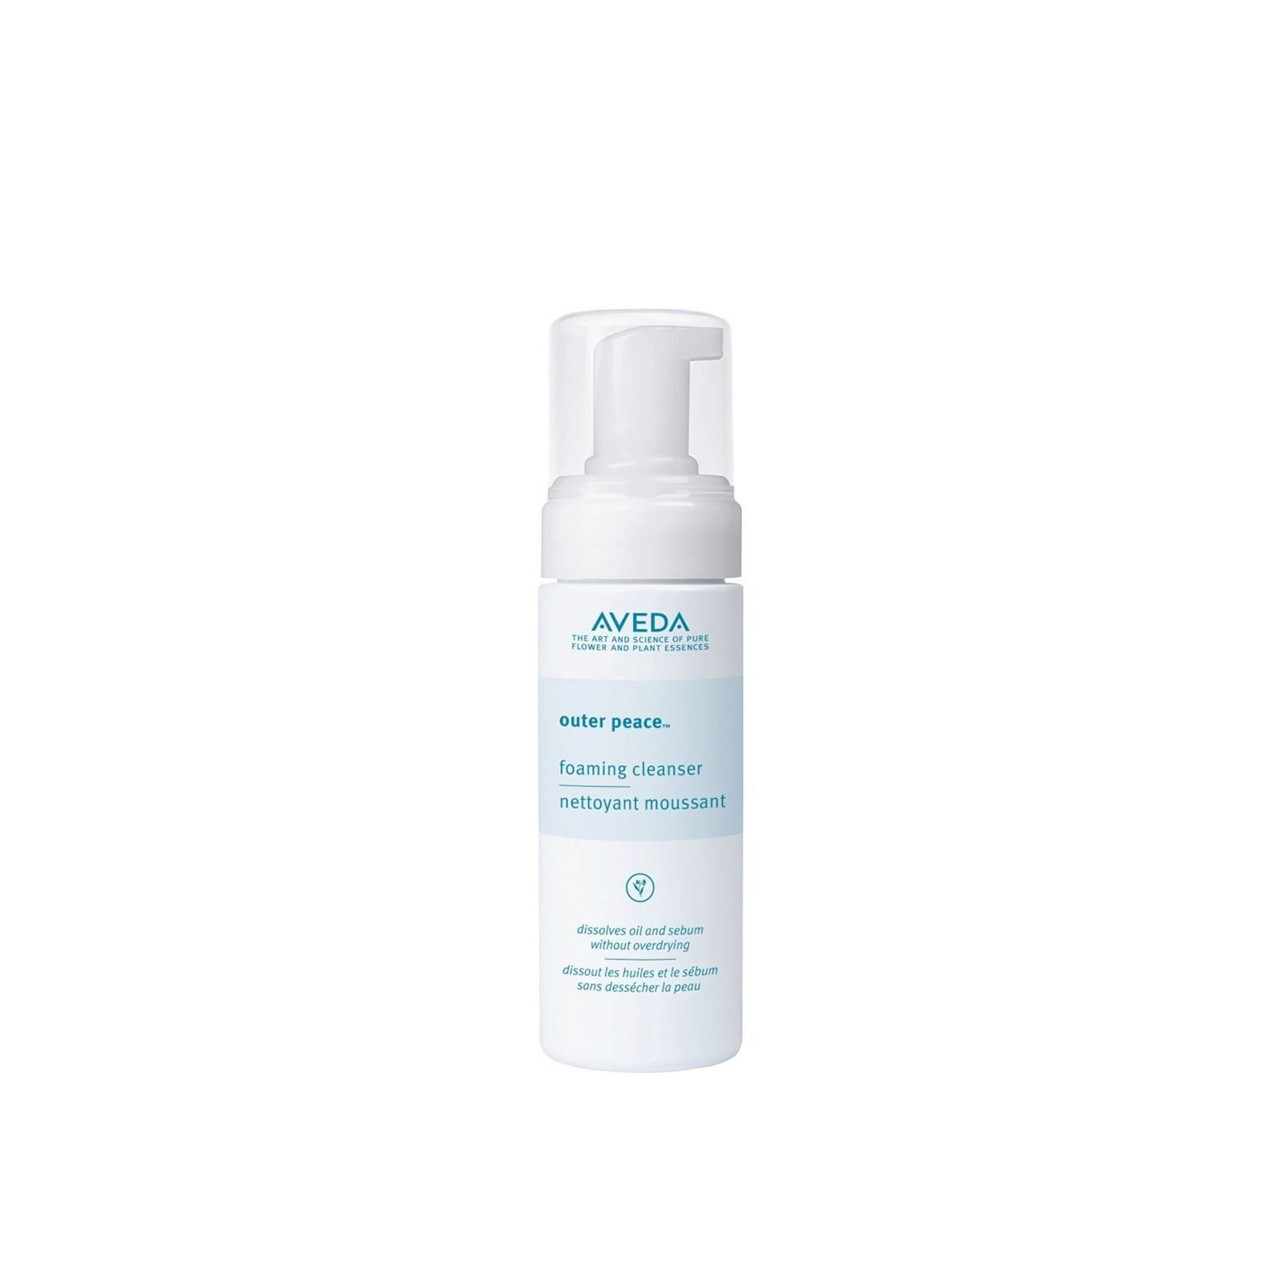 Aveda Outer Peace Foaming Cleanser 125ml (4.2 fl oz)